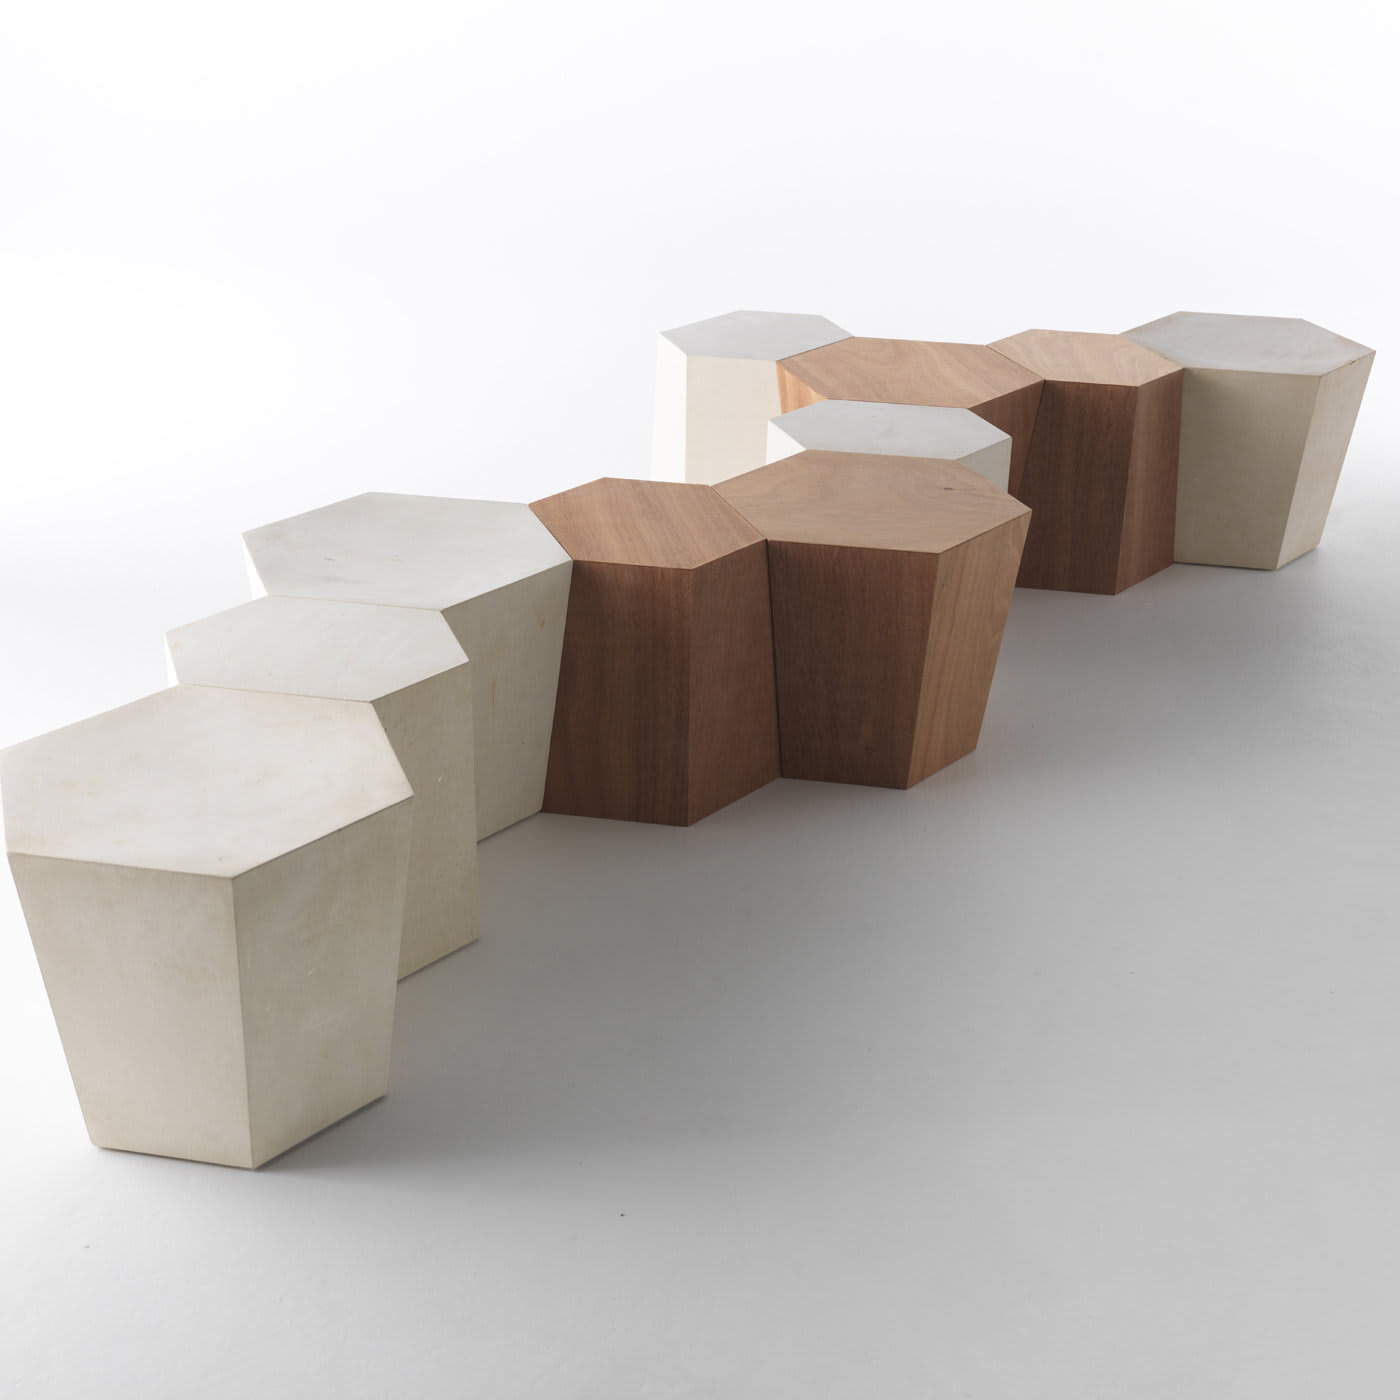 Hexagon Outdoor Coffee Table by Steven Holl - Horm